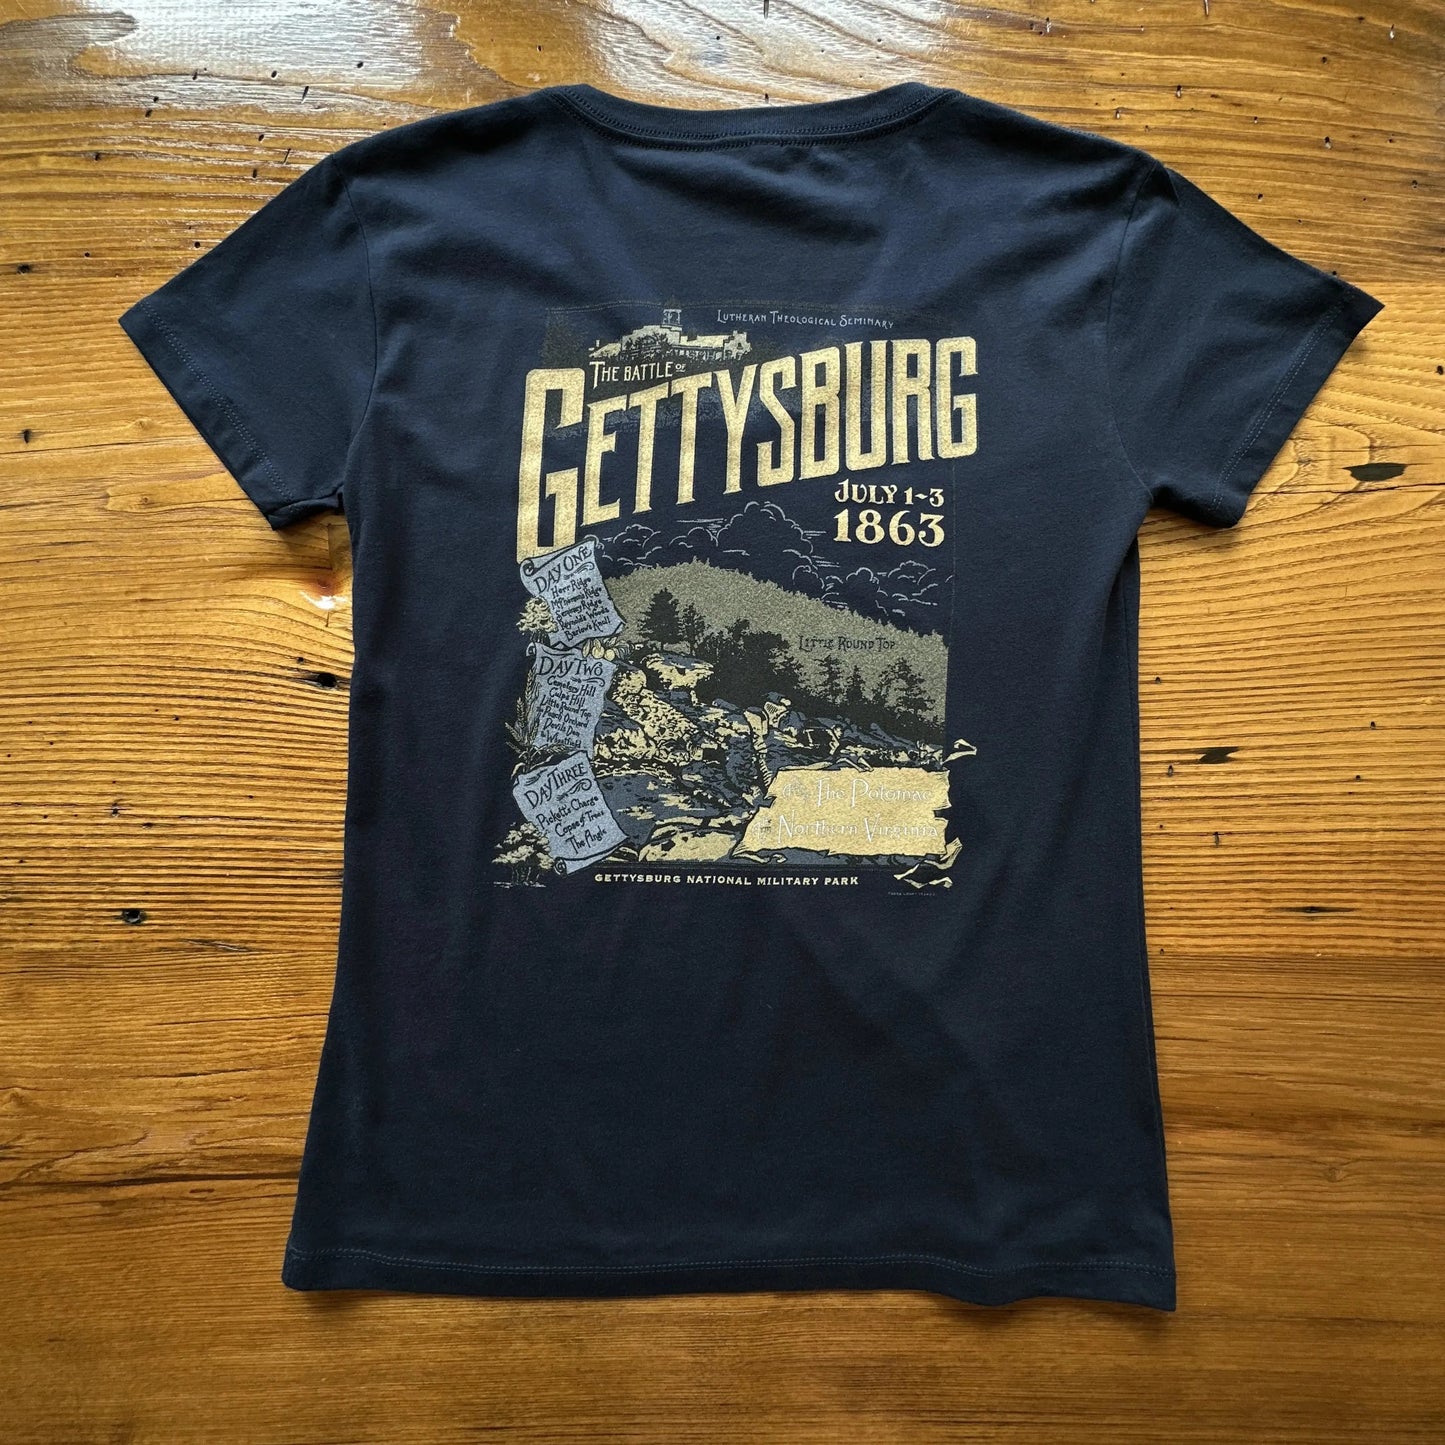 Back of "The Battle of Gettysburg" Women's V-neck shirt from The History List store